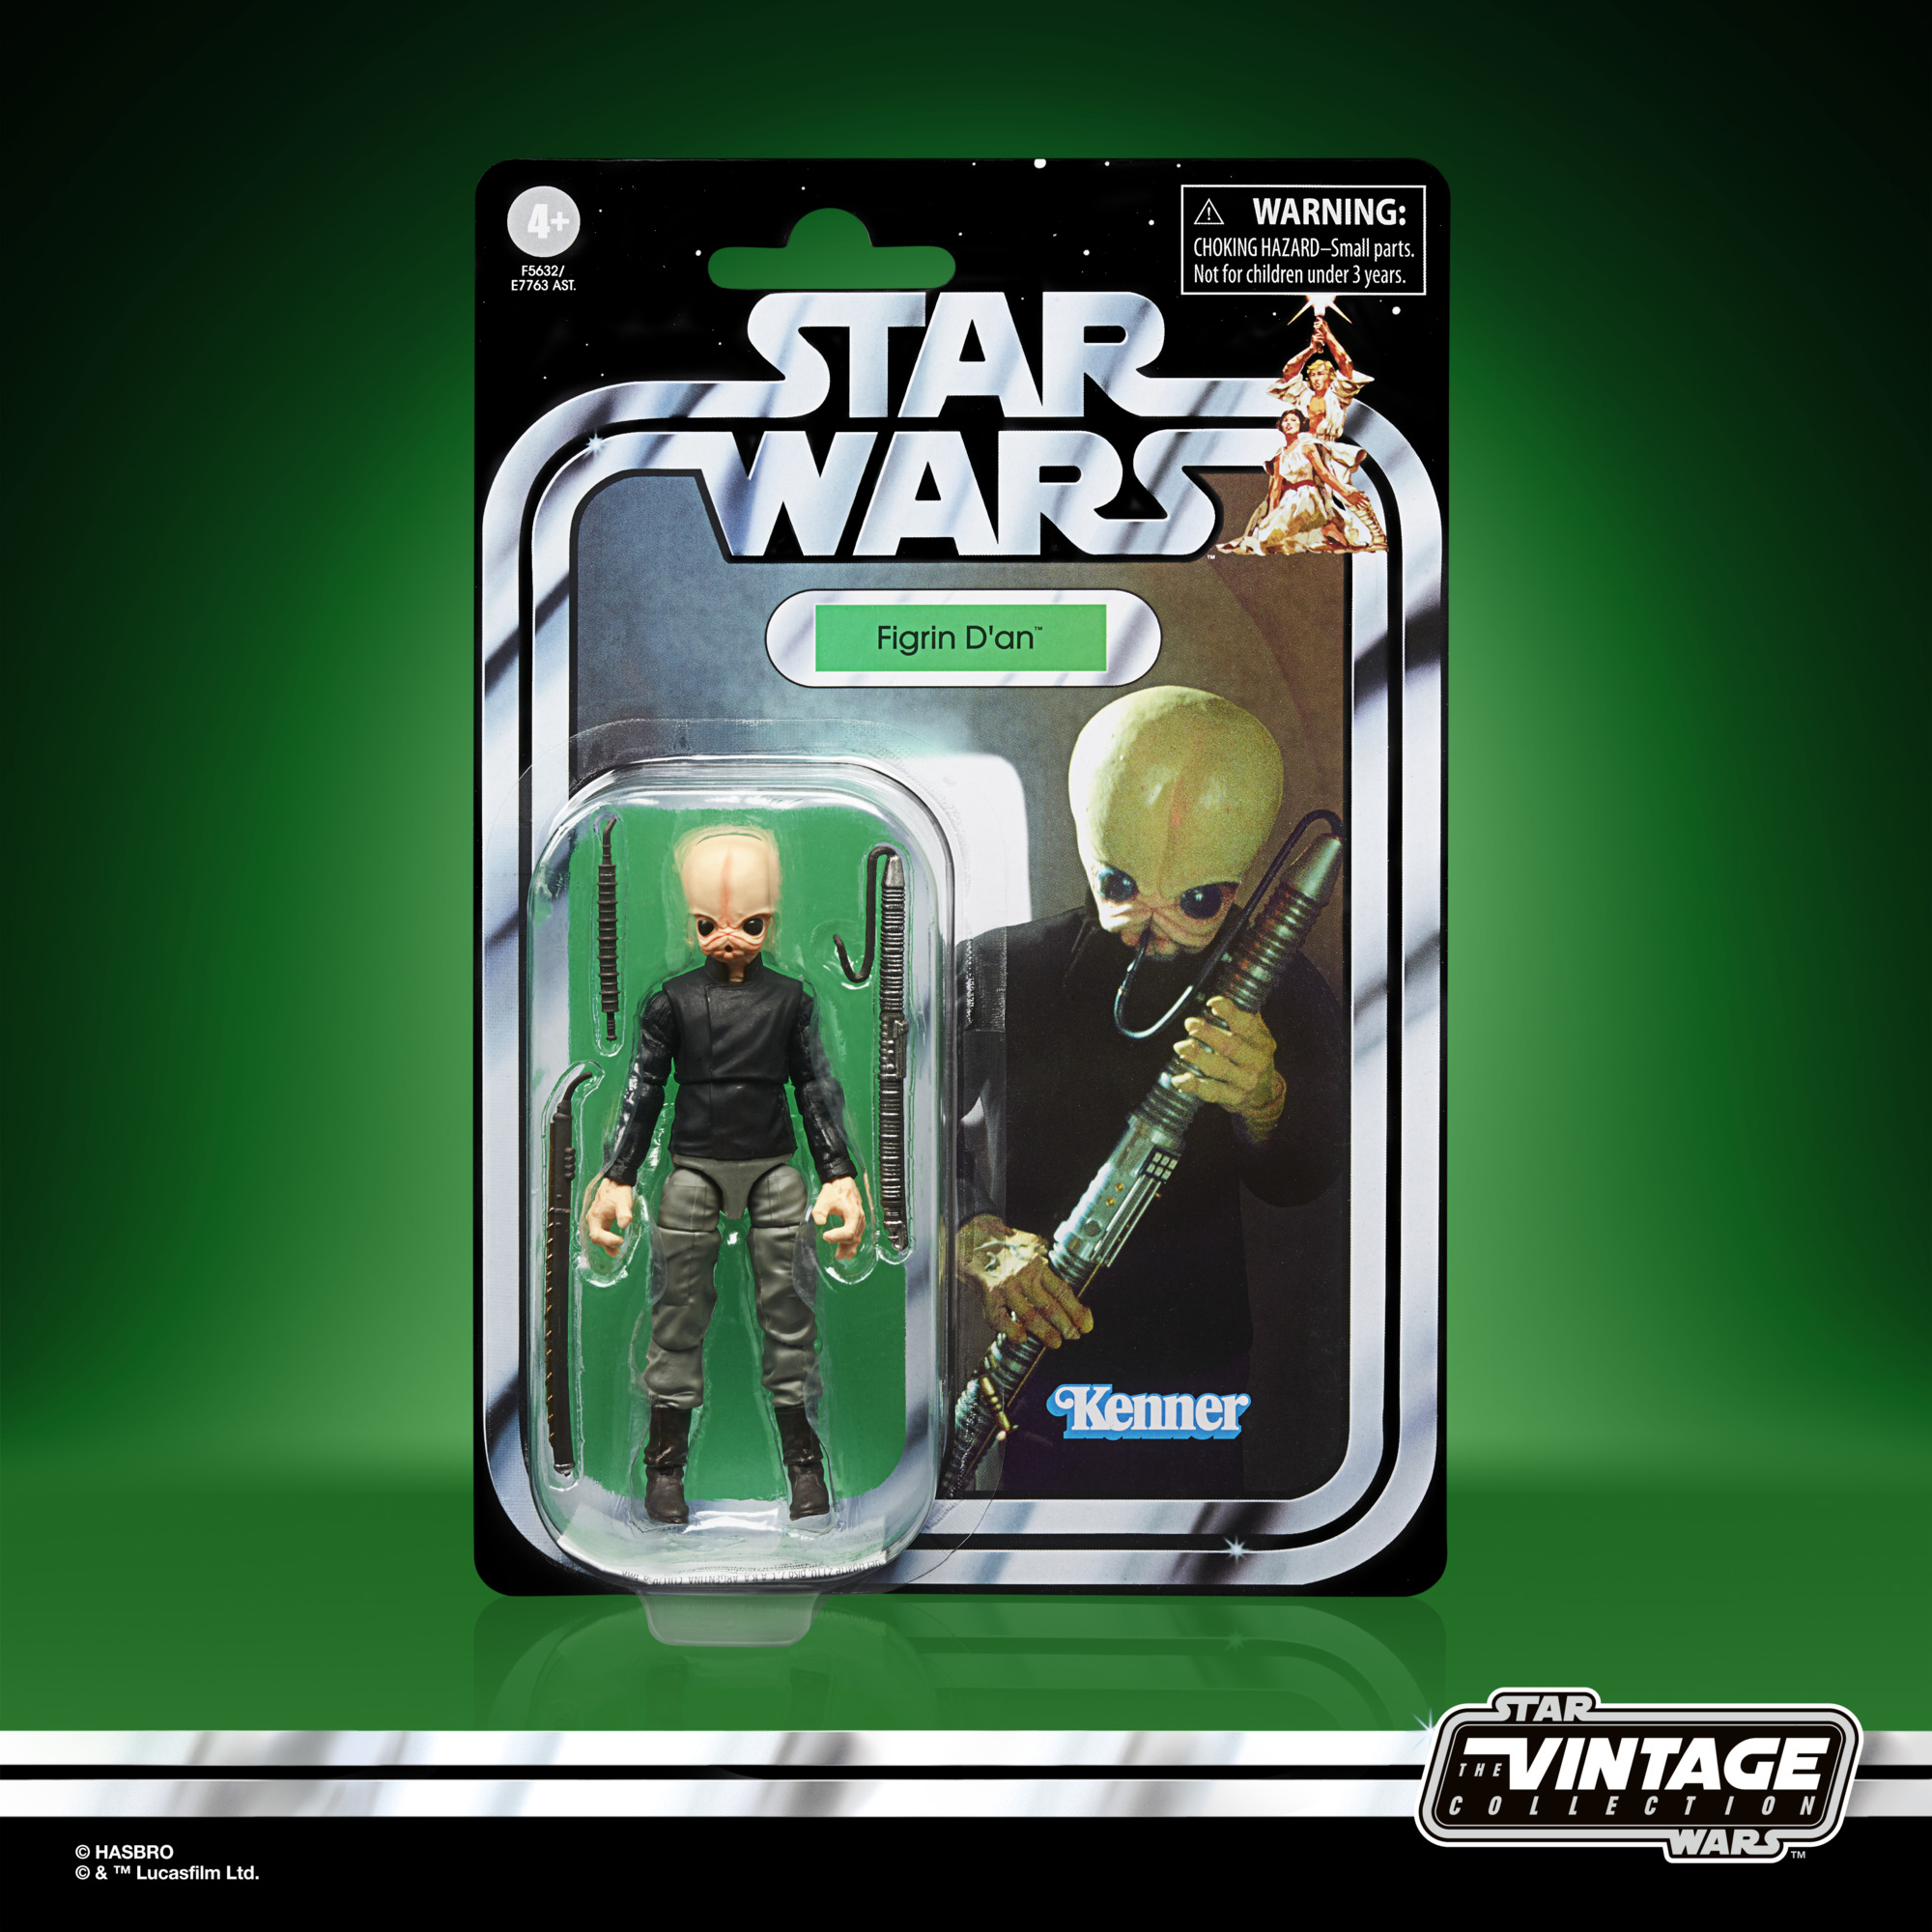 Star Wars: The Vintage Collection Figrin D'An Packaging